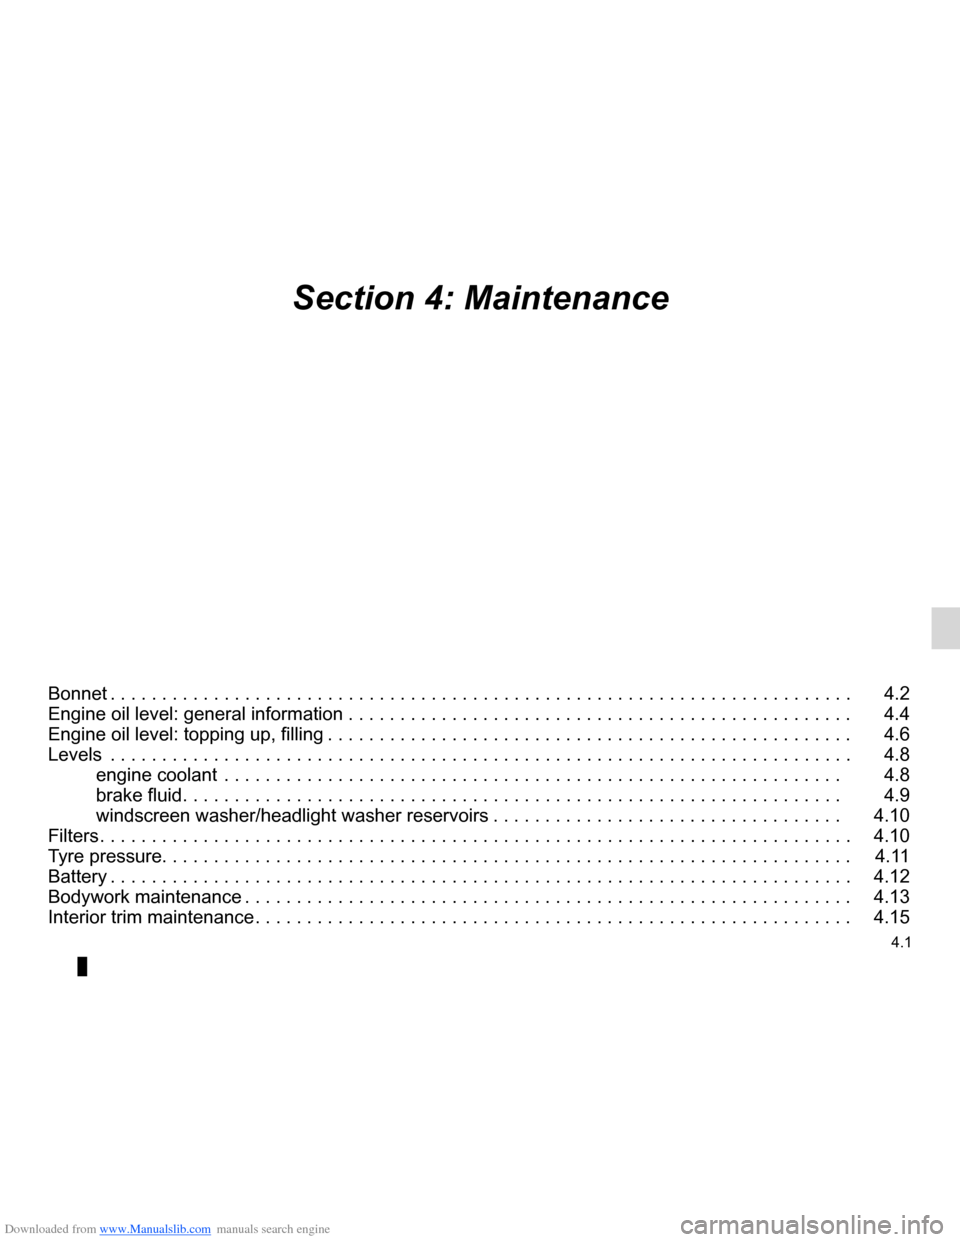 RENAULT CLIO 2012 X85 / 3.G Owners Manual Downloaded from www.Manualslib.com manuals search engine 4.1
ENG_UD25610_8
Sommaire 4 (X85 - B85 - C85 - S85 - K85 - Renault)
ENG_NU_853-7_BCSK85_Renault_4
Section 4: Maintenance
Bonnet . . . . . . . 